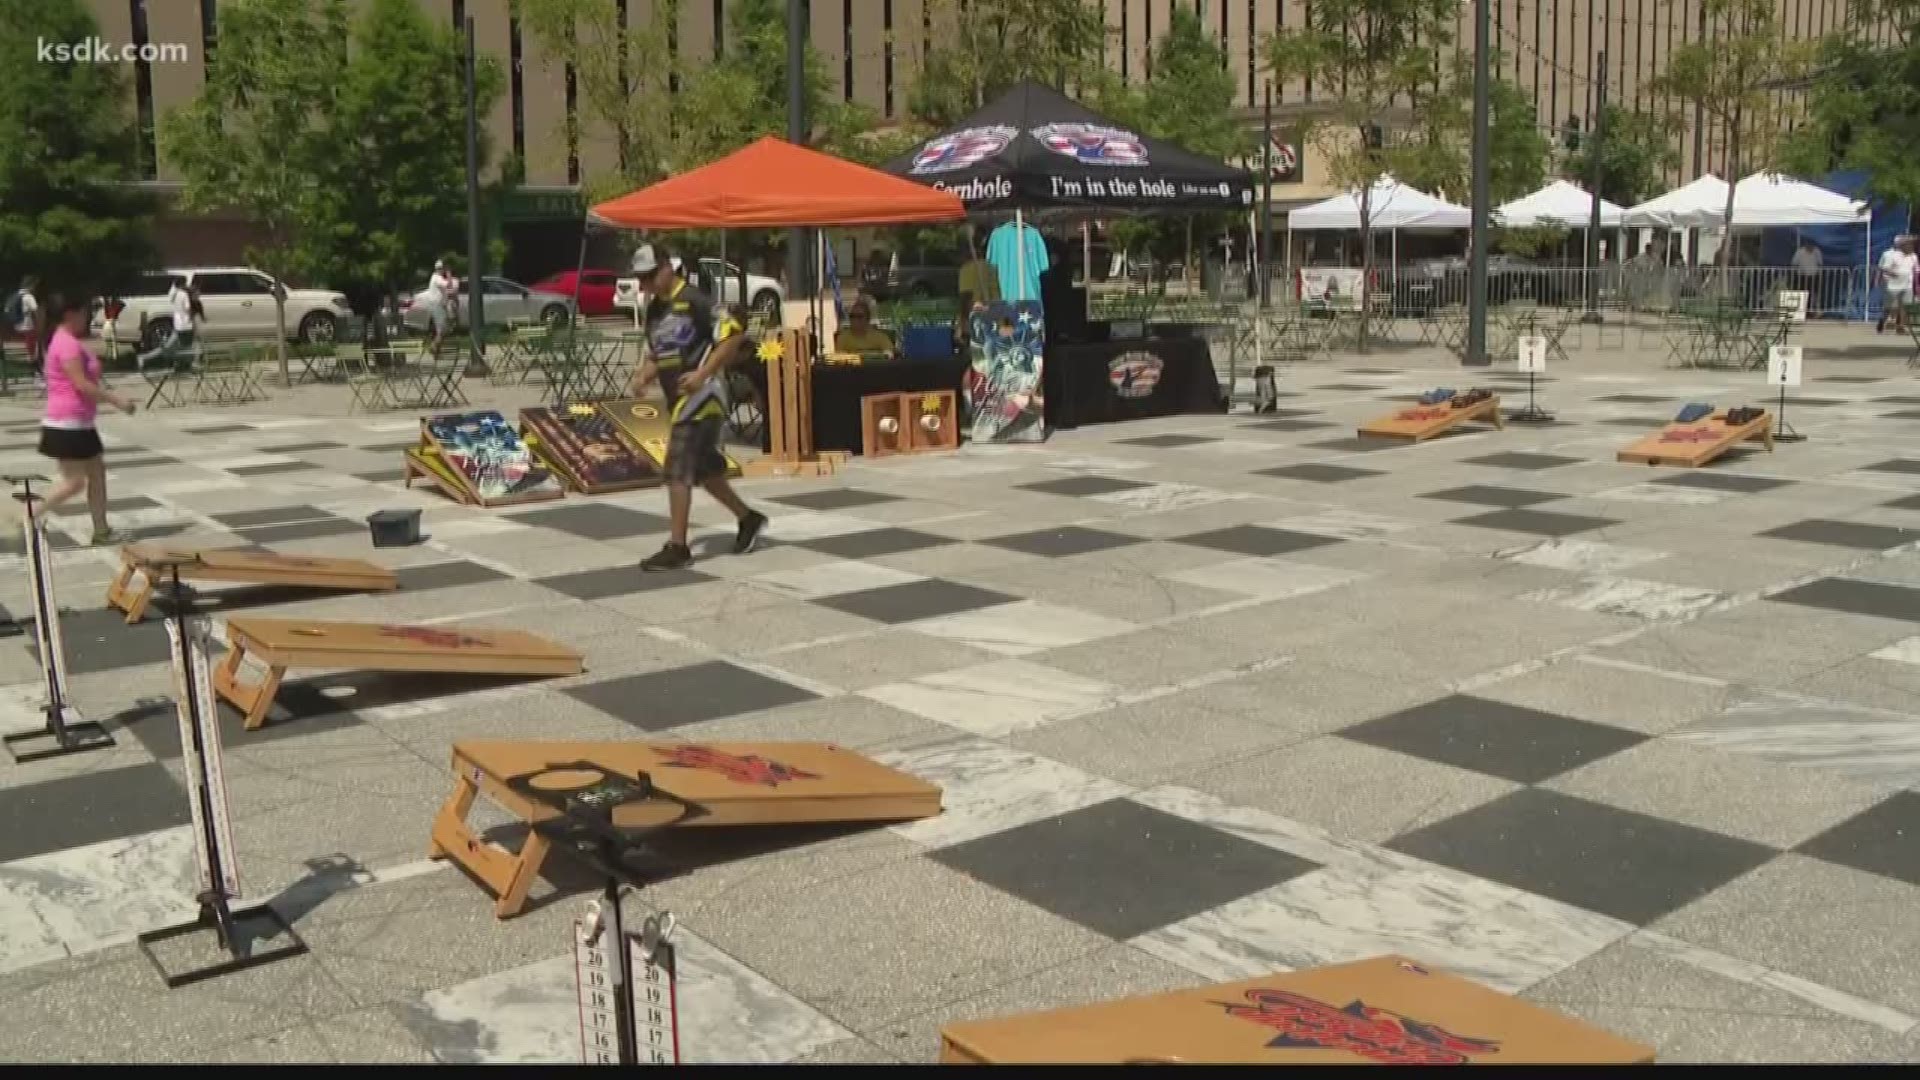 The festivities have already started downtown, with a pre-party in Kiener Plaza.